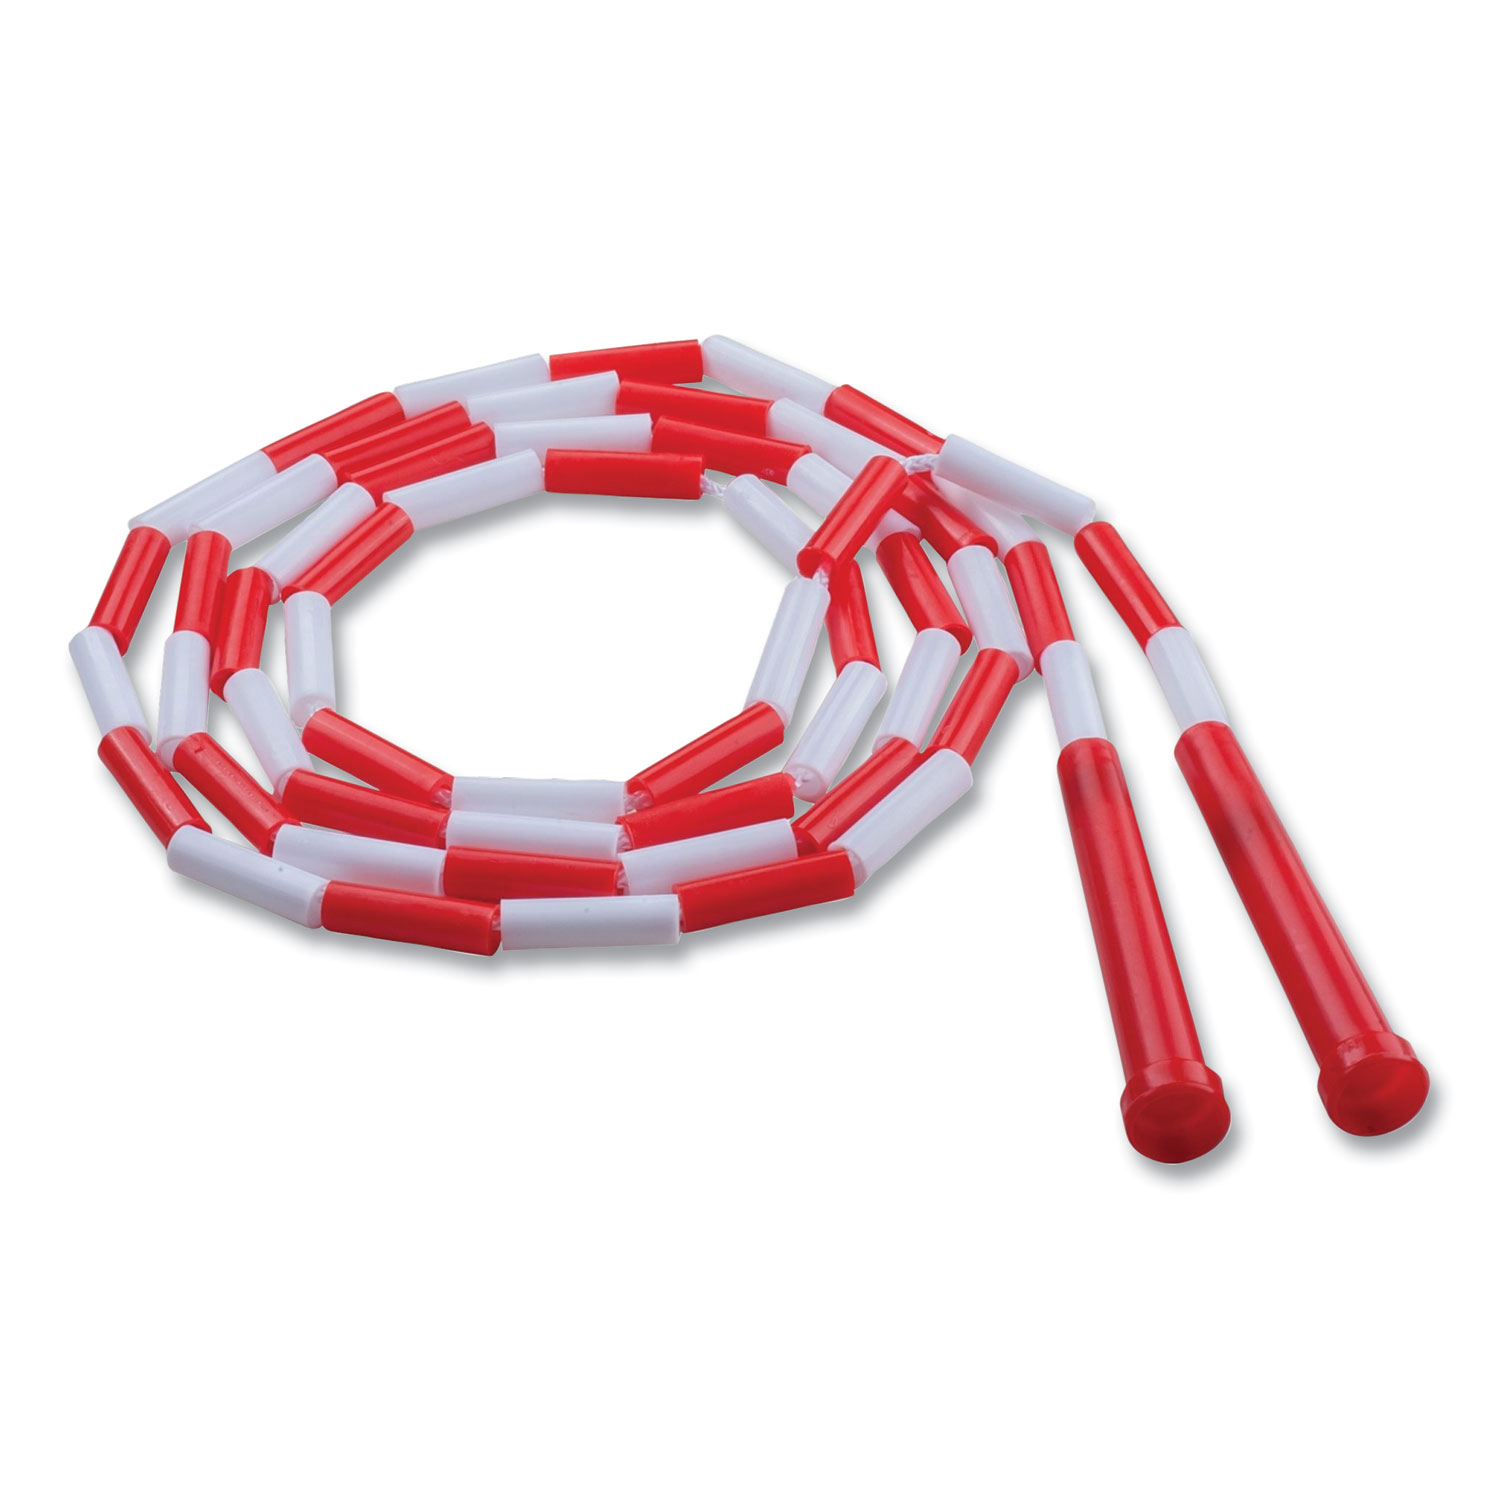 Segmented Plastic Jump Rope, 7 ft, Red/White - ASE Direct